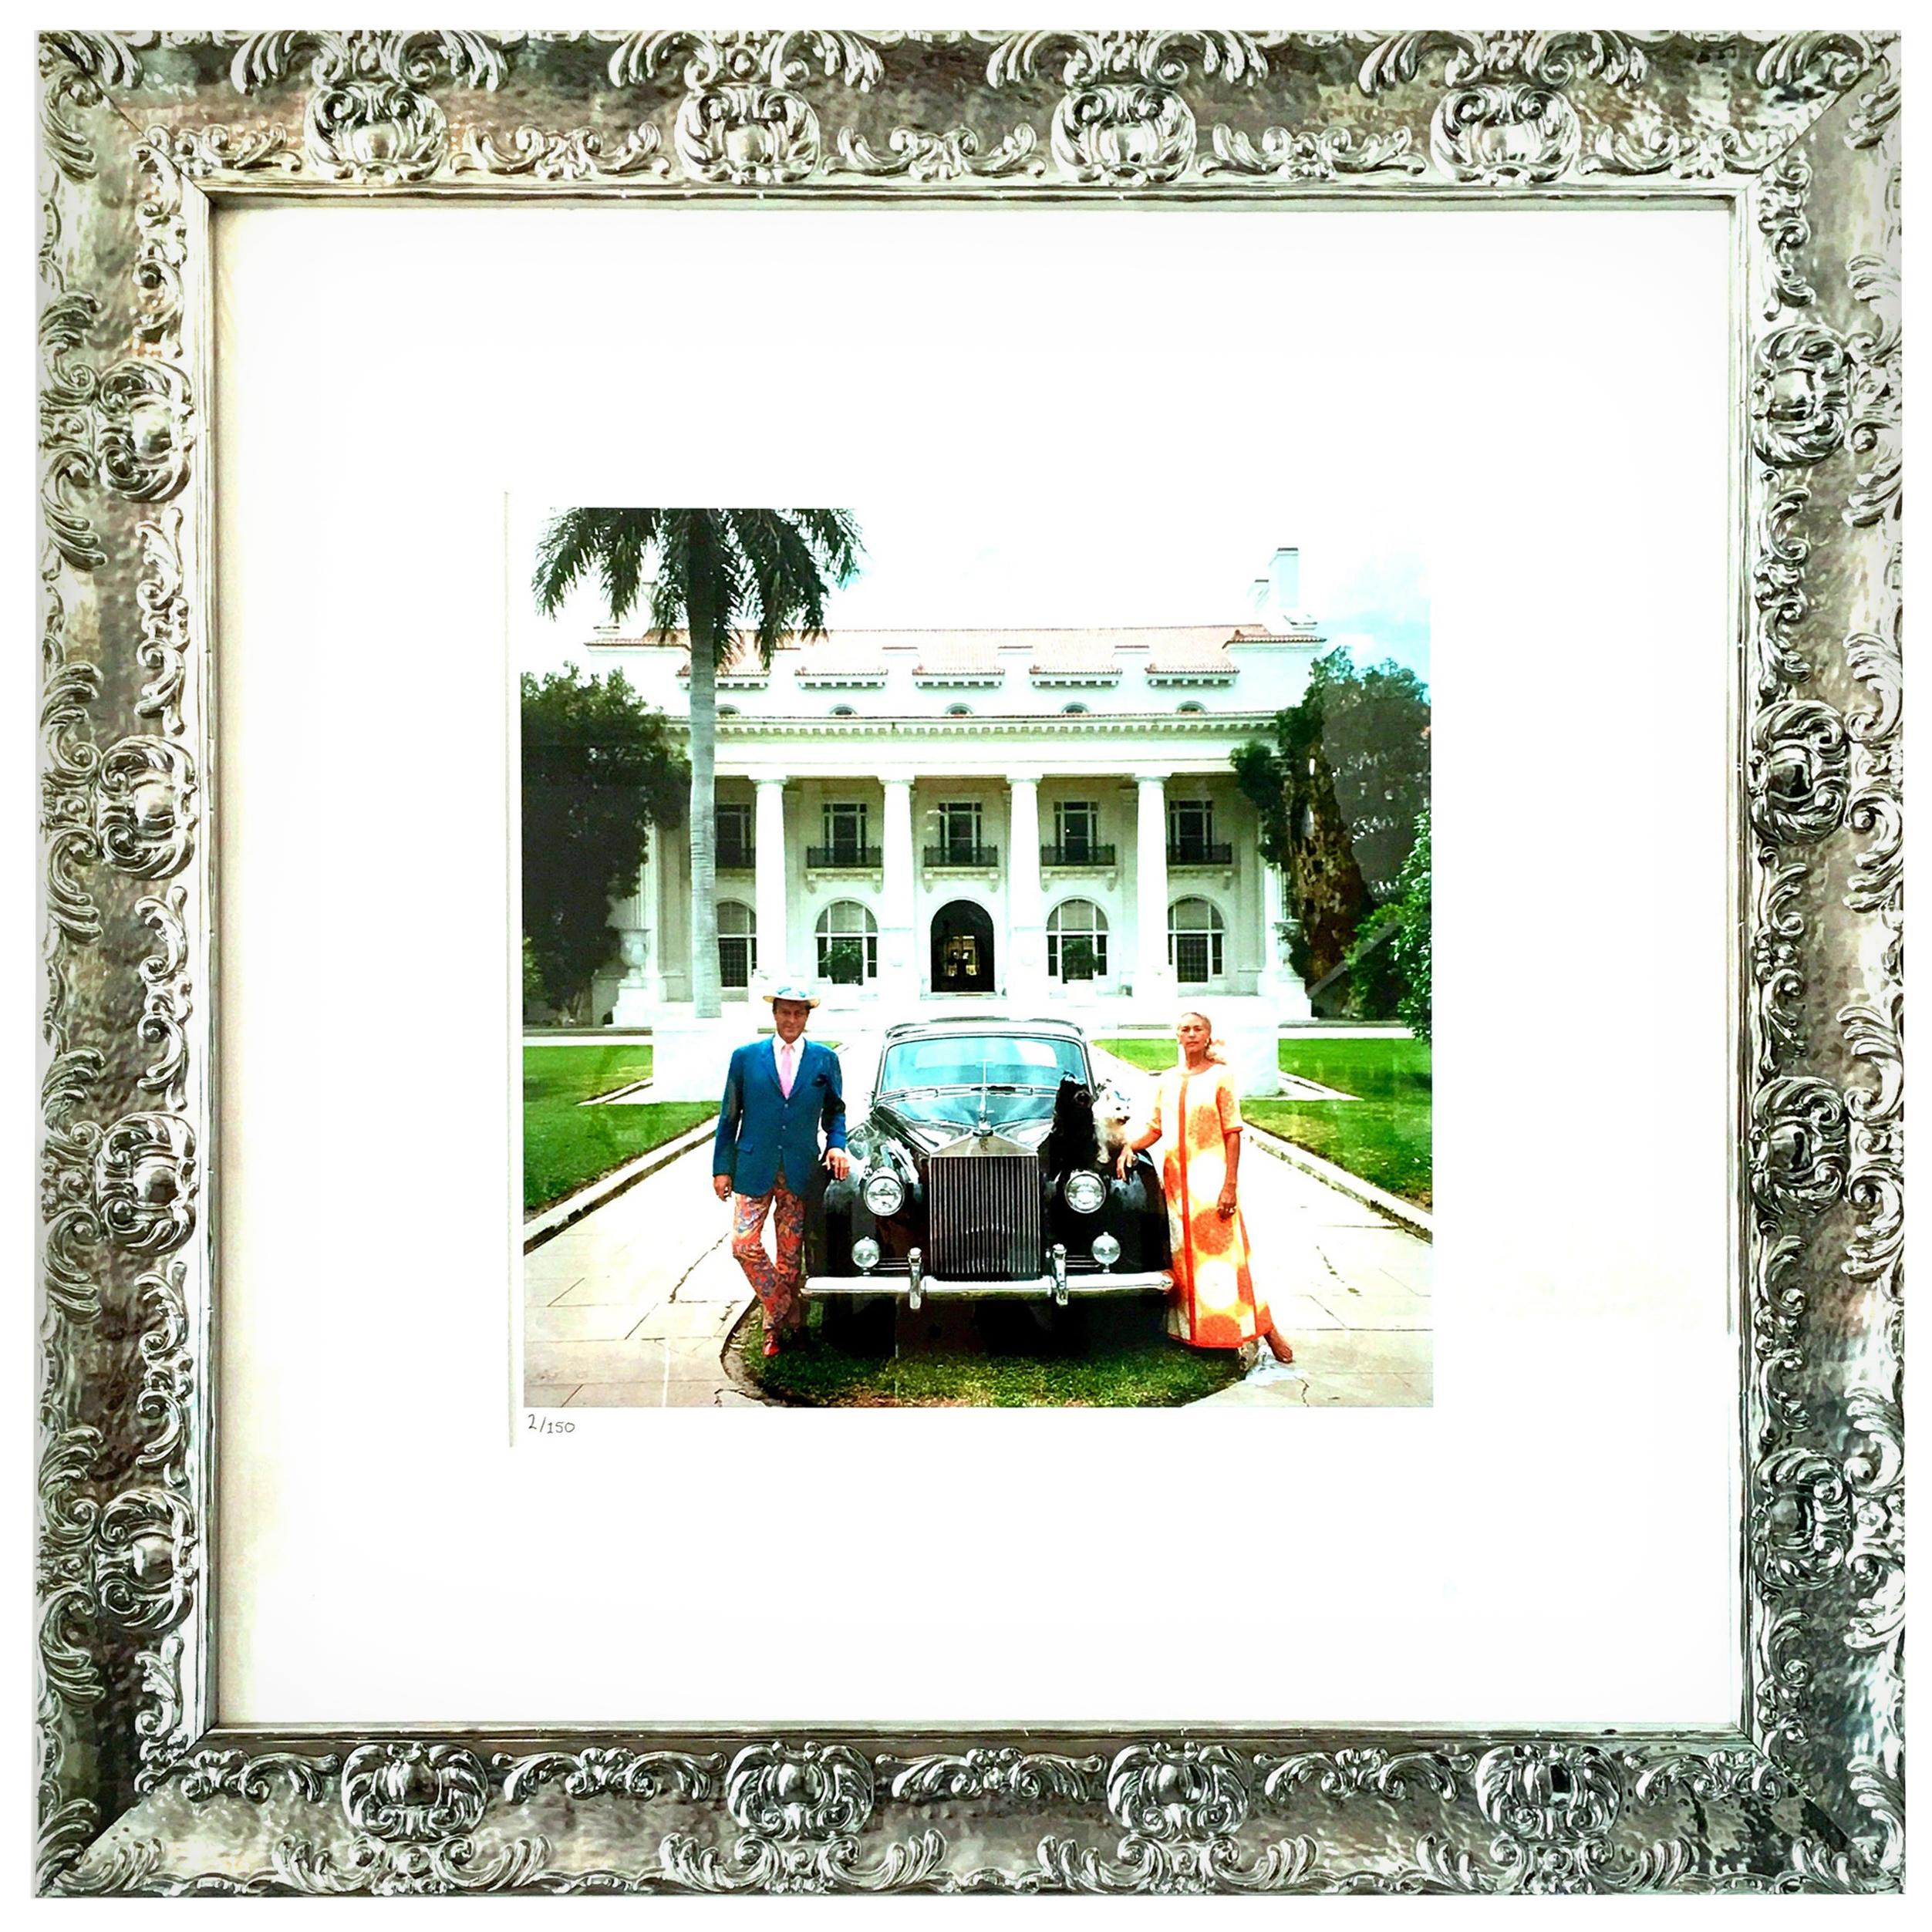 1968 Slim Aarons Photograph "Donald Leas Palm Beach" Estate Stamped LE 2/150 For Sale